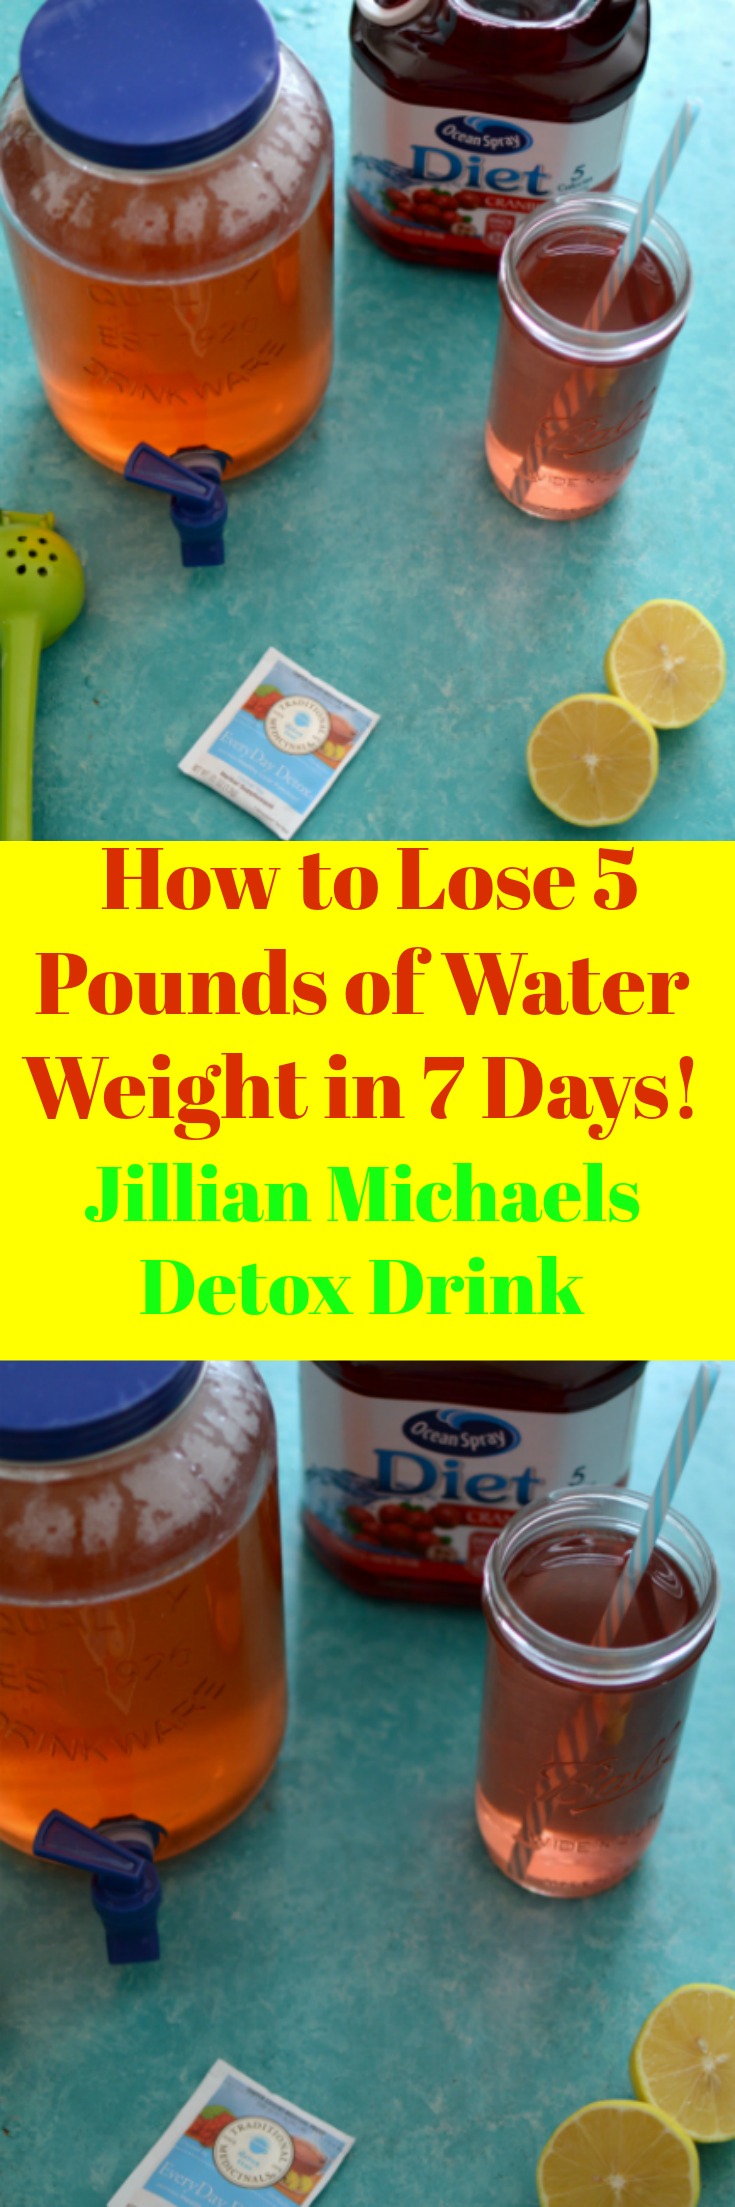 You will absolutely have to try the Jillian Michaels Detox Drink and learn quickly How to Lose 5 Pounds of water weight you have been carrying around. Drink this drink for five continuous days and flush unwanted toxins and belly waste away. This is the Ultimate drink for crushing those weight loss goals.